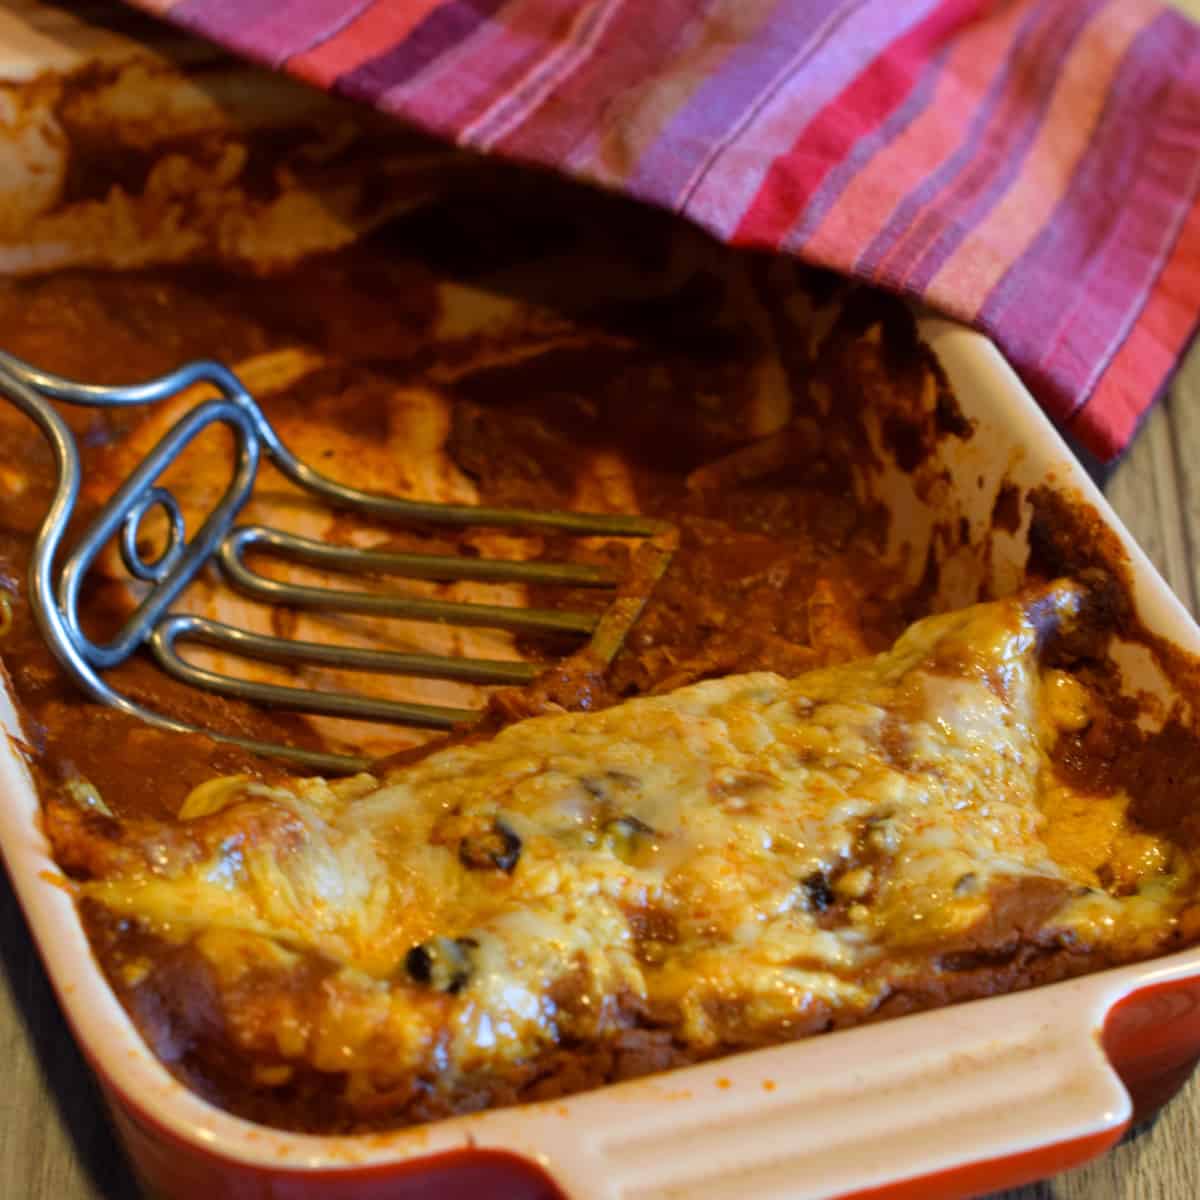 A shredded chicken enchilada in a baking dish with a striped napkin and old fashioned  serving spoon.